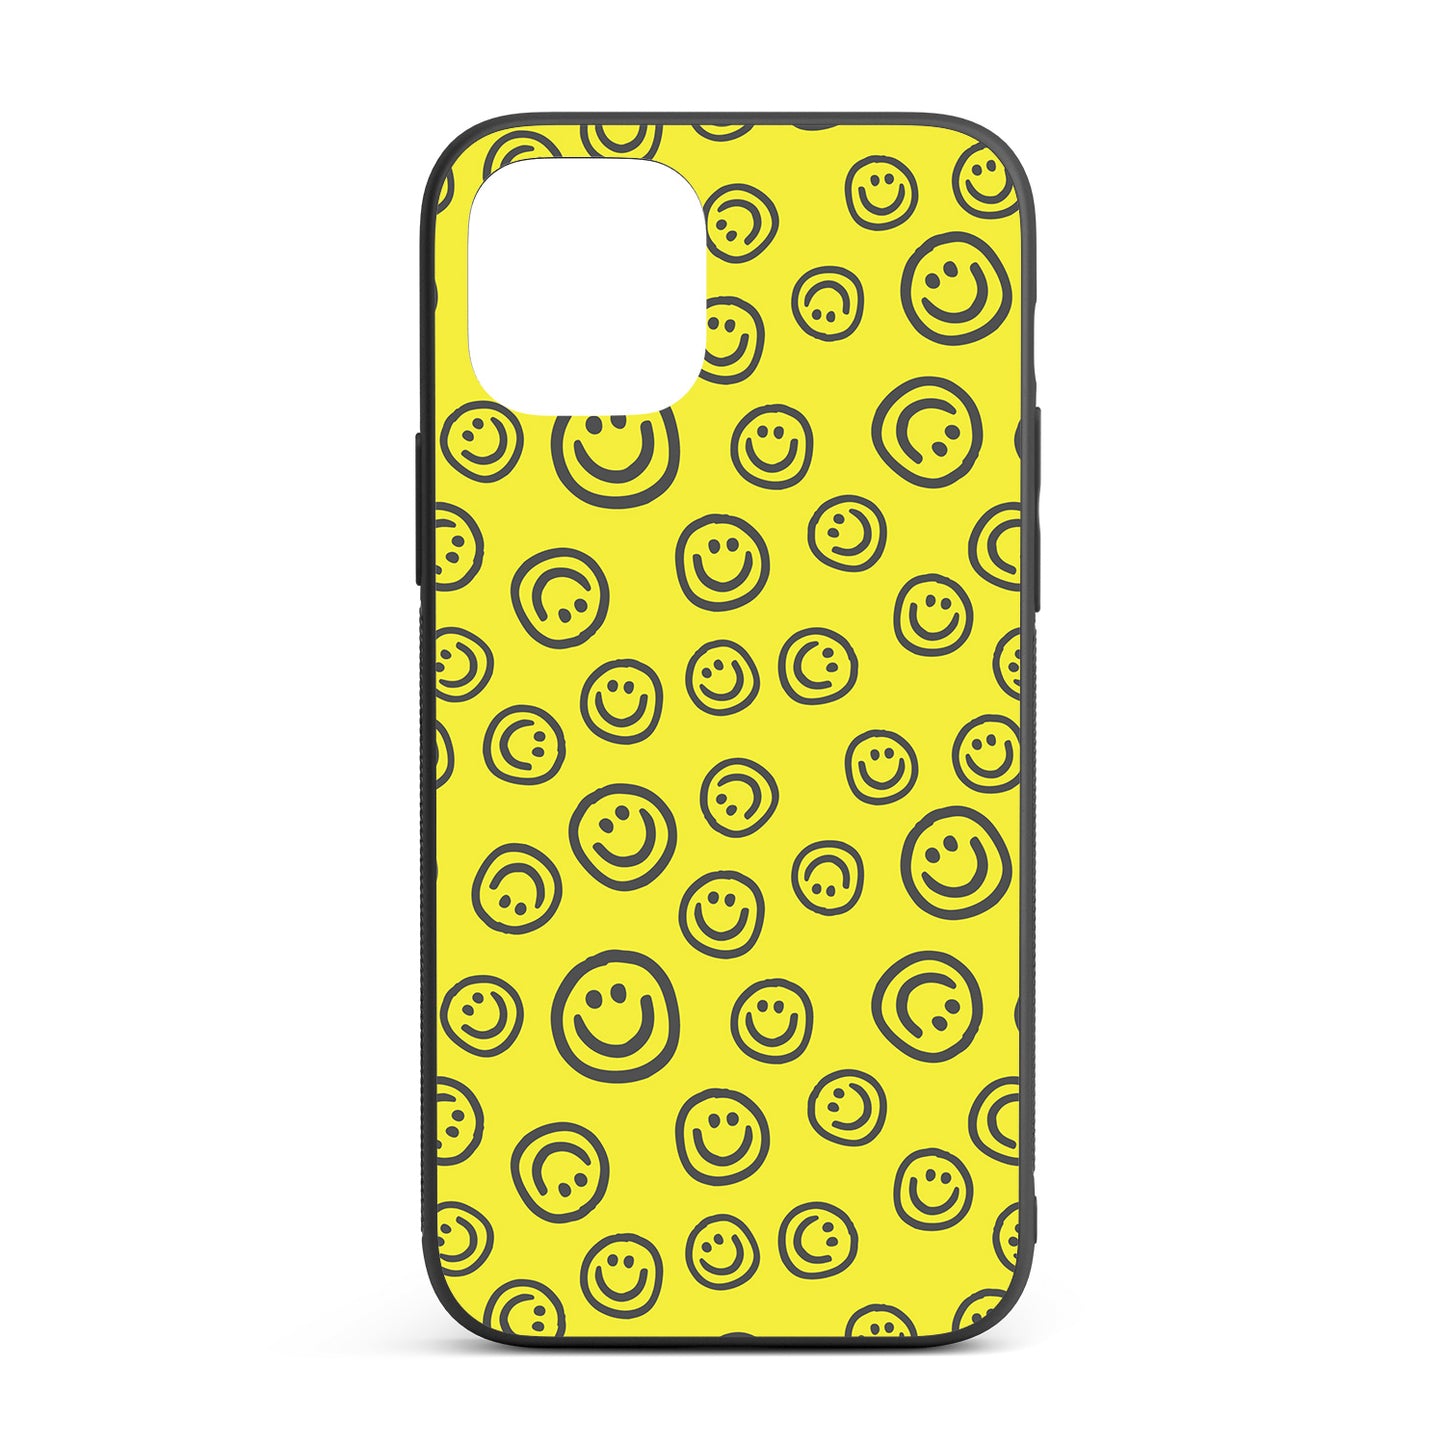 Marker Smiles iPhone glass case